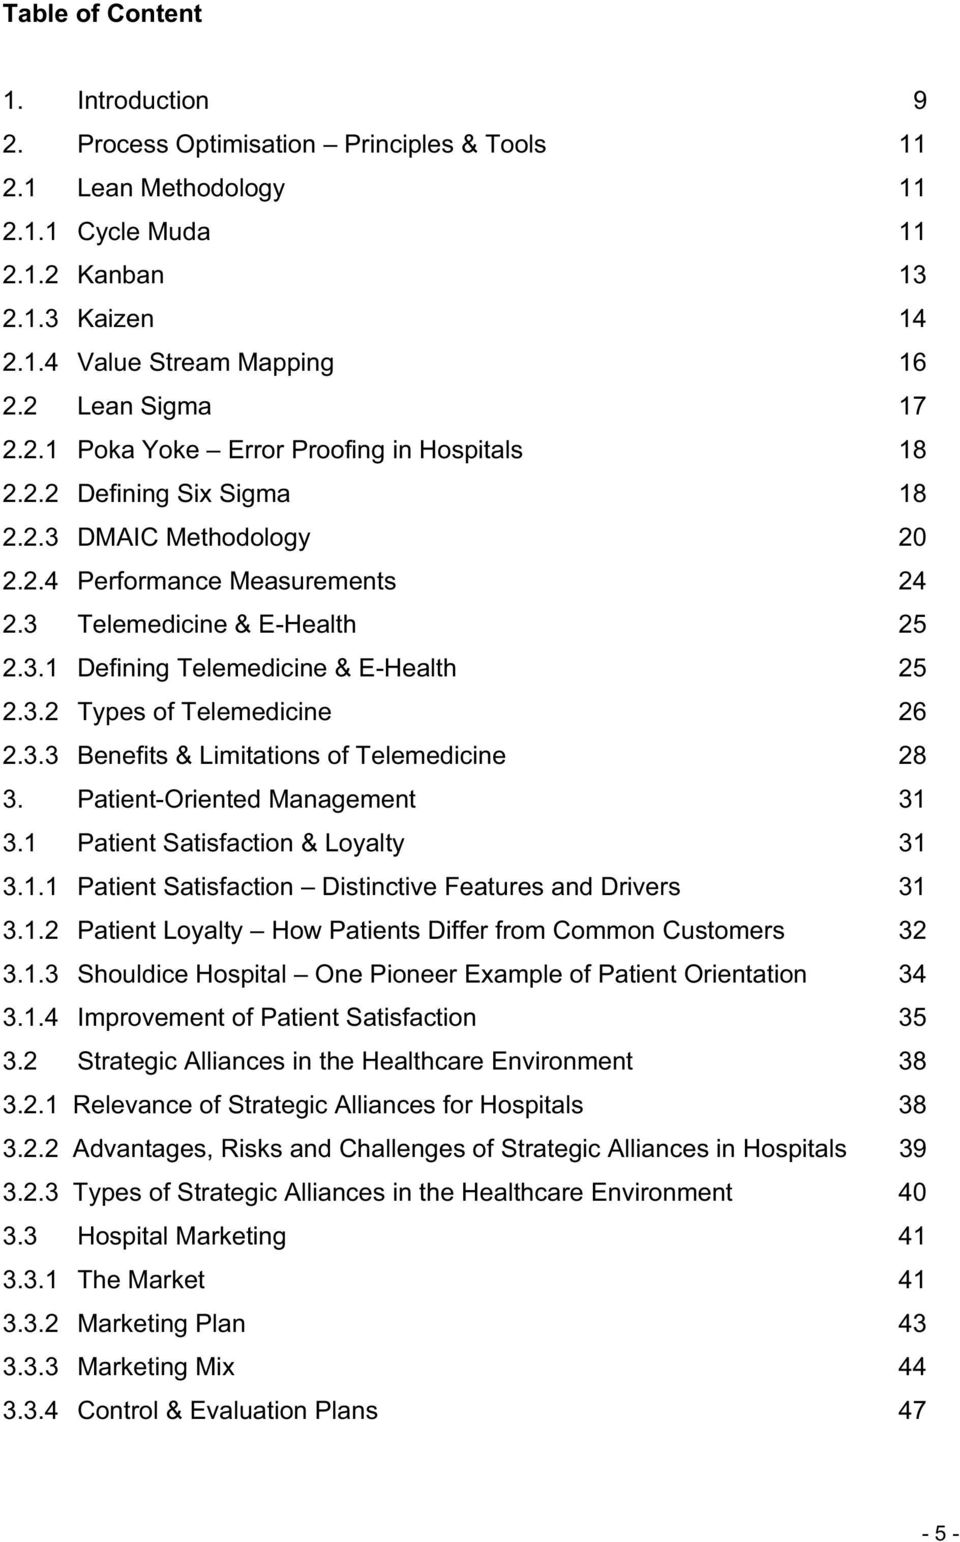 3.2 Types of Telemedicine 26 2.3.3 Benefits & Limitations of Telemedicine 28 3. Patient-Oriented Management 31 3.1 Patient Satisfaction & Loyalty 31 3.1.1 Patient Satisfaction Distinctive Features and Drivers 31 3.